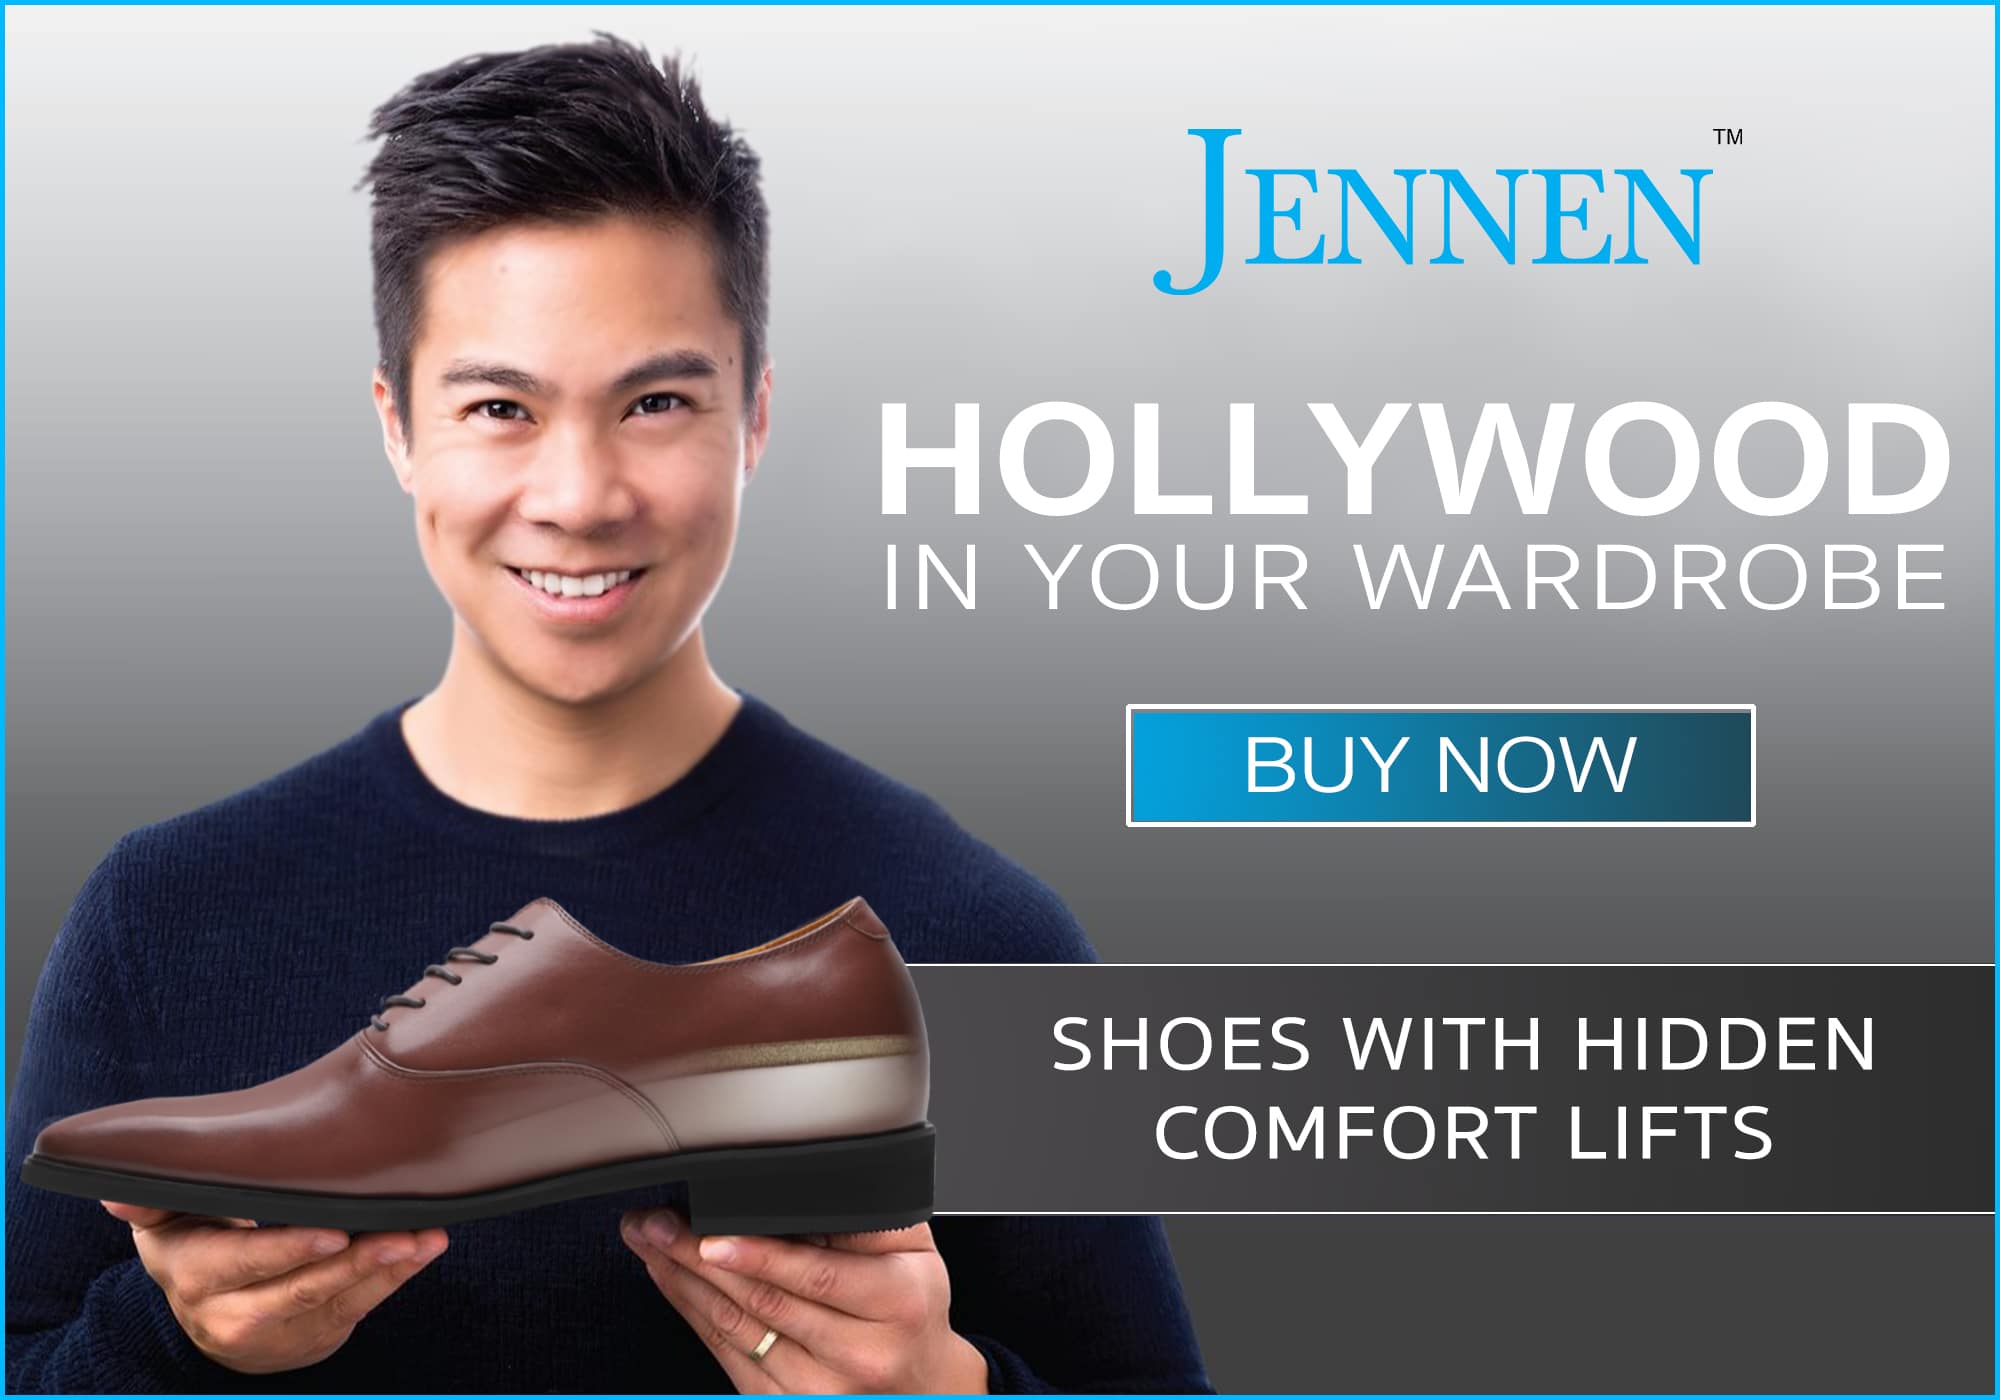 JENNEN Elevator Shoes | Worn by Hollywood Celebrities